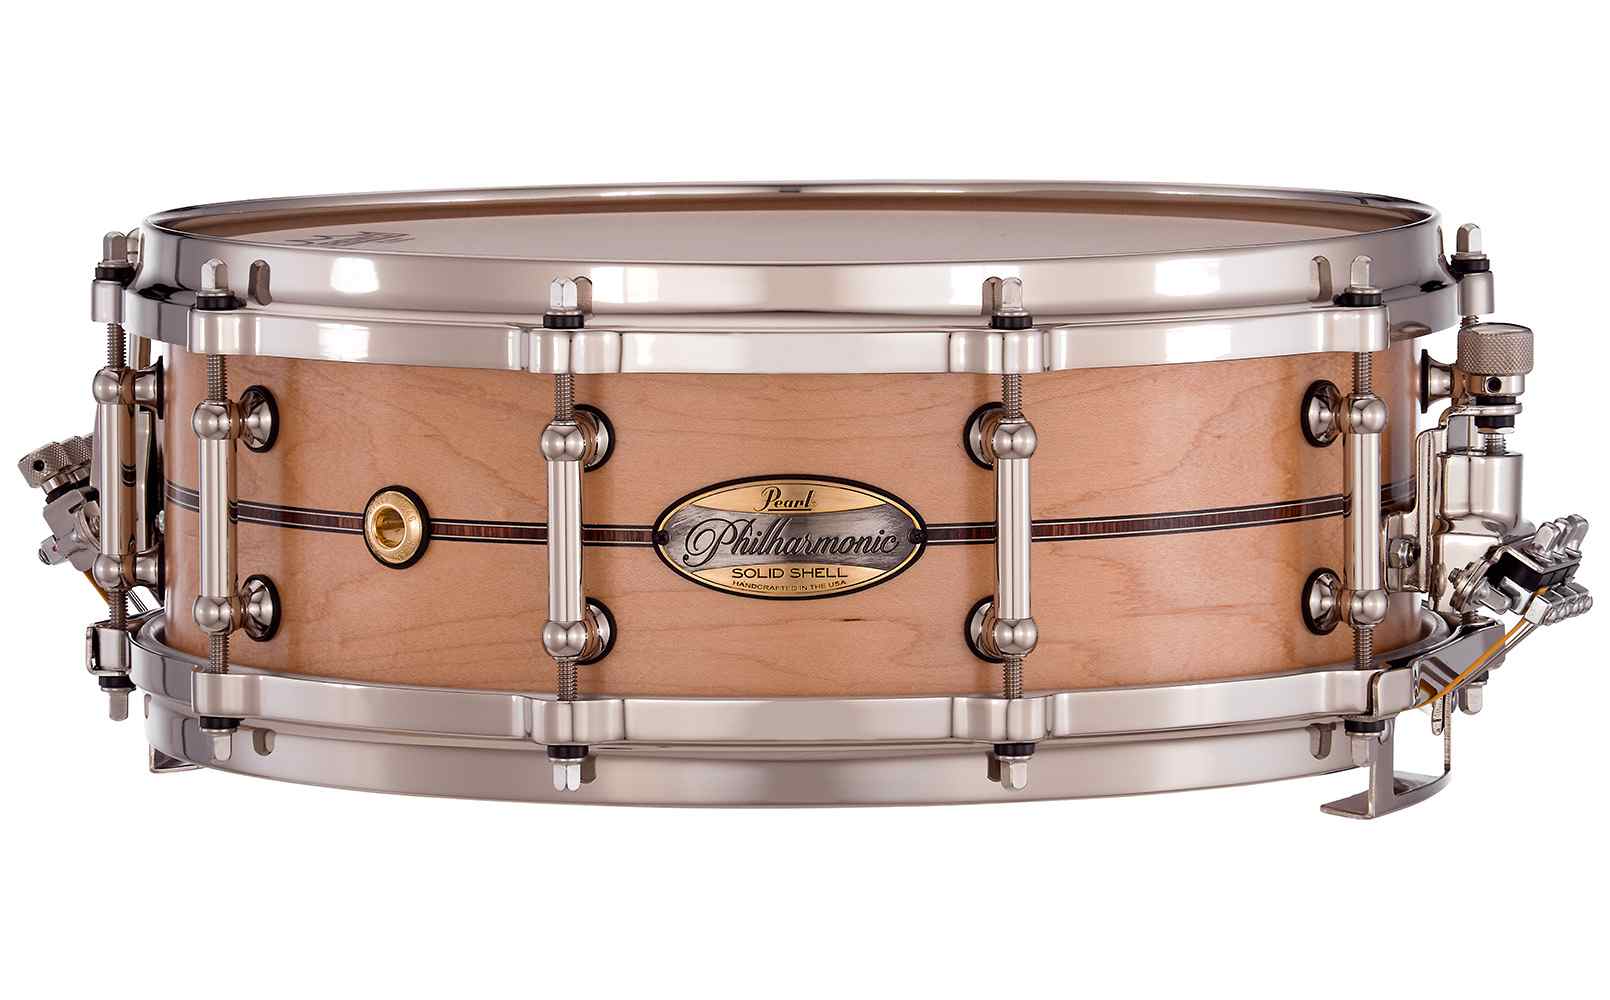 Philharmonic USA Solid Shell | Pearl Drums -Official site-